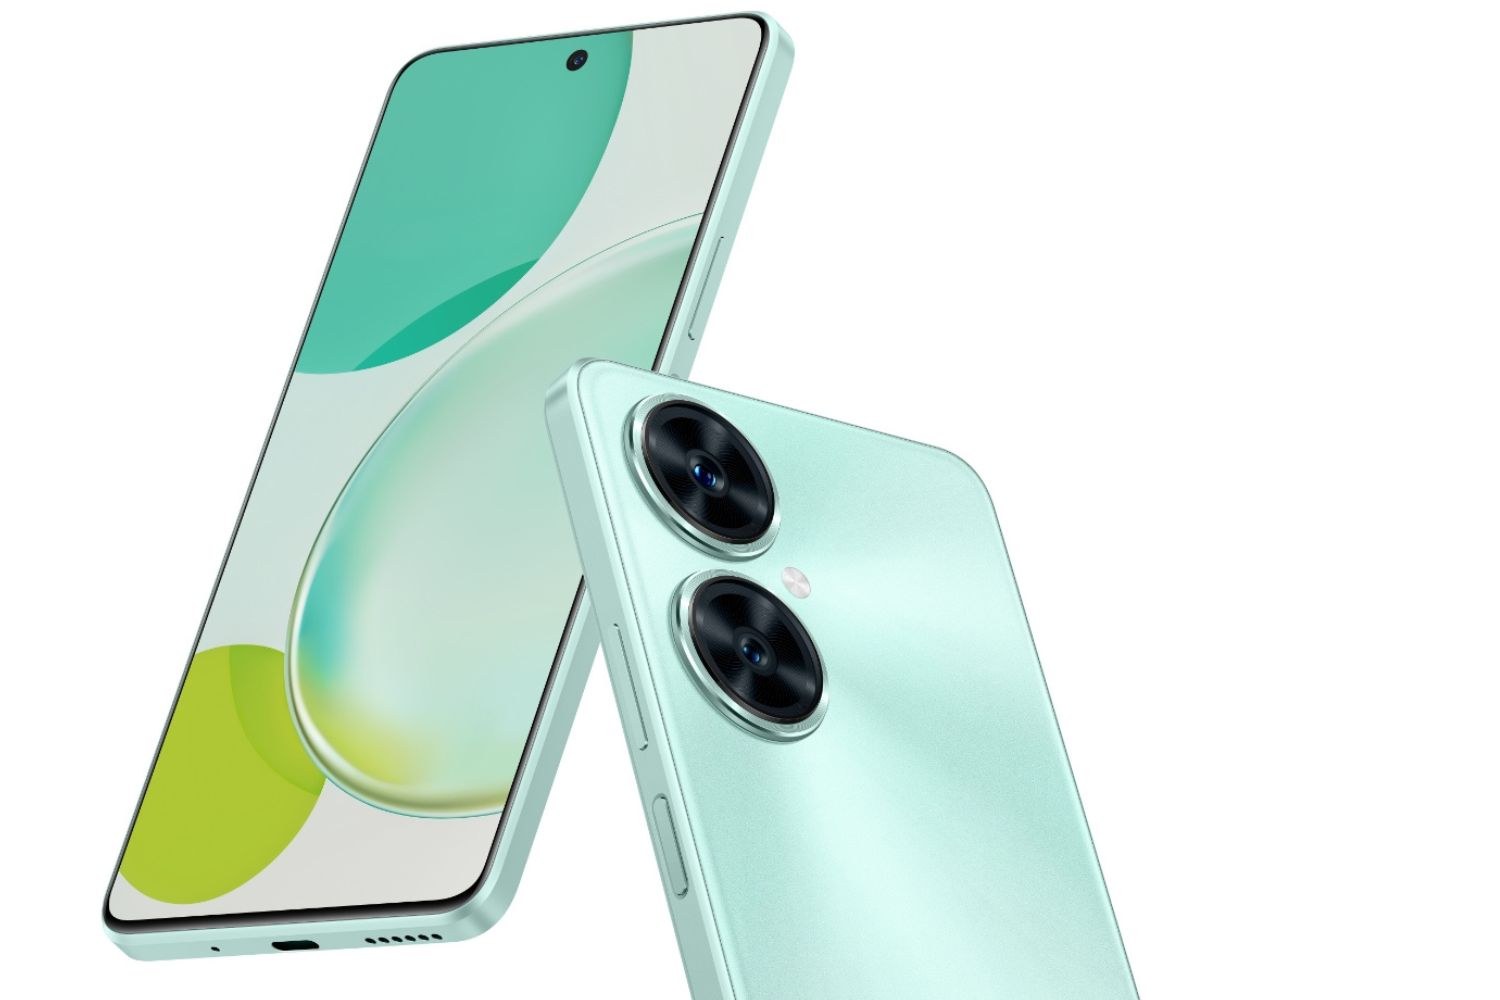 First-ever sales of the 108-megapixel Huawei Nova 11 SE are underway